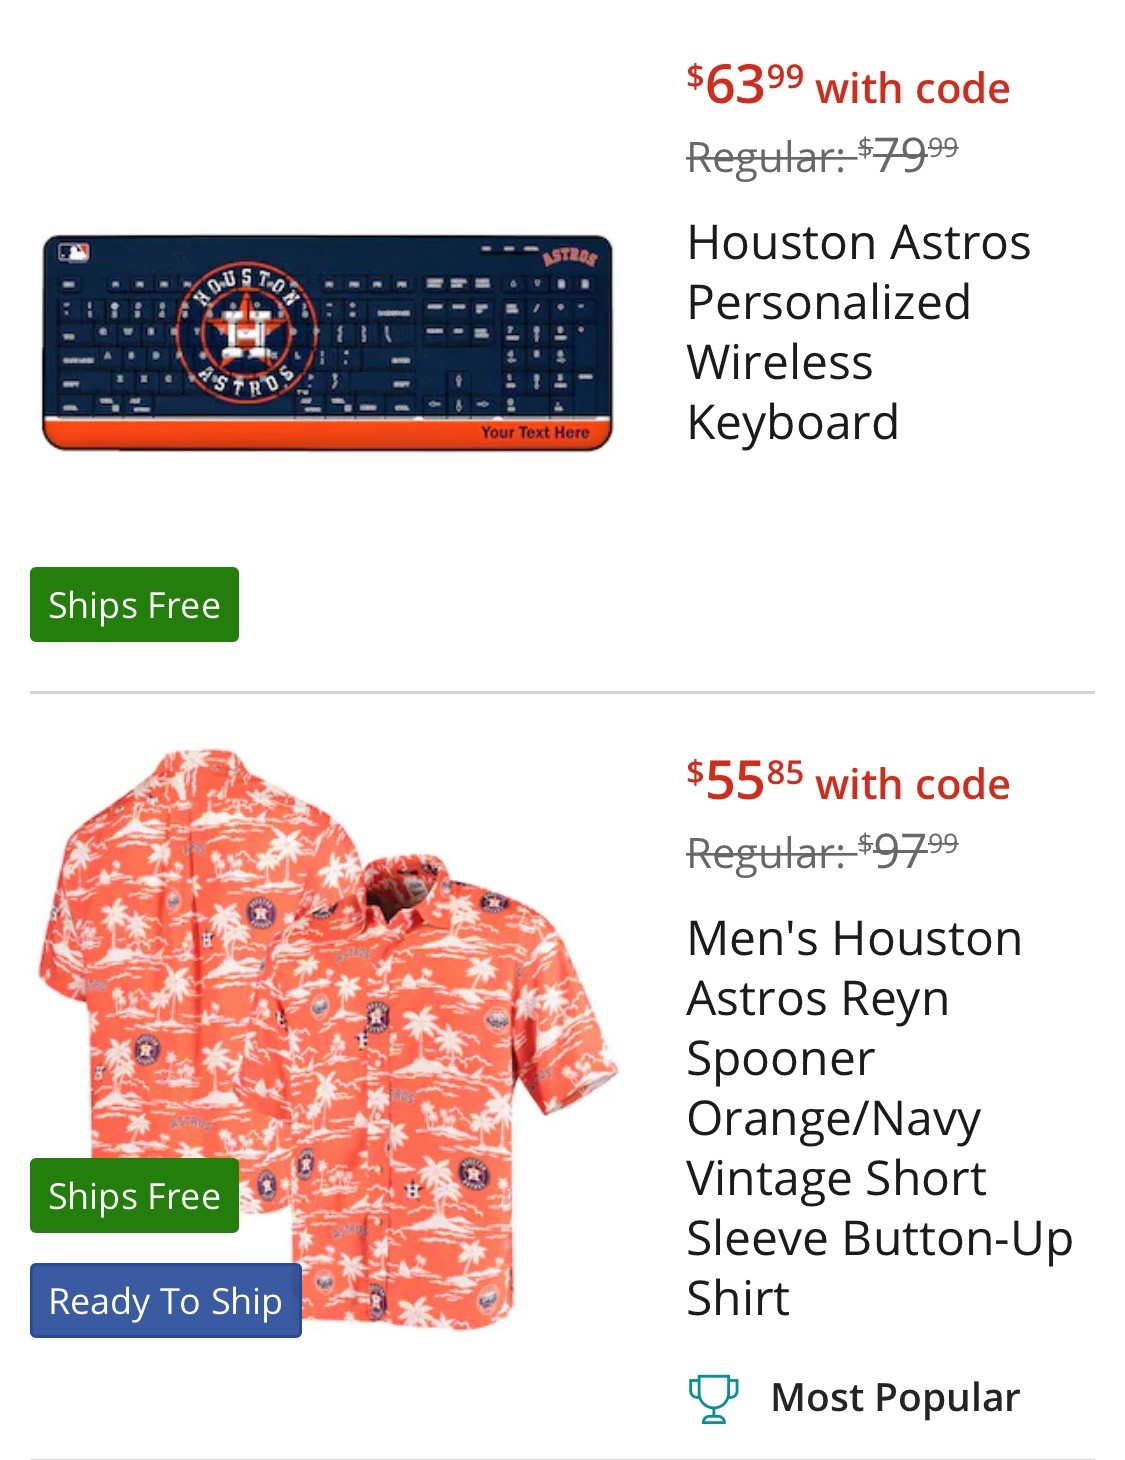 Make a statement🧢: Astros fans have more merchandise options